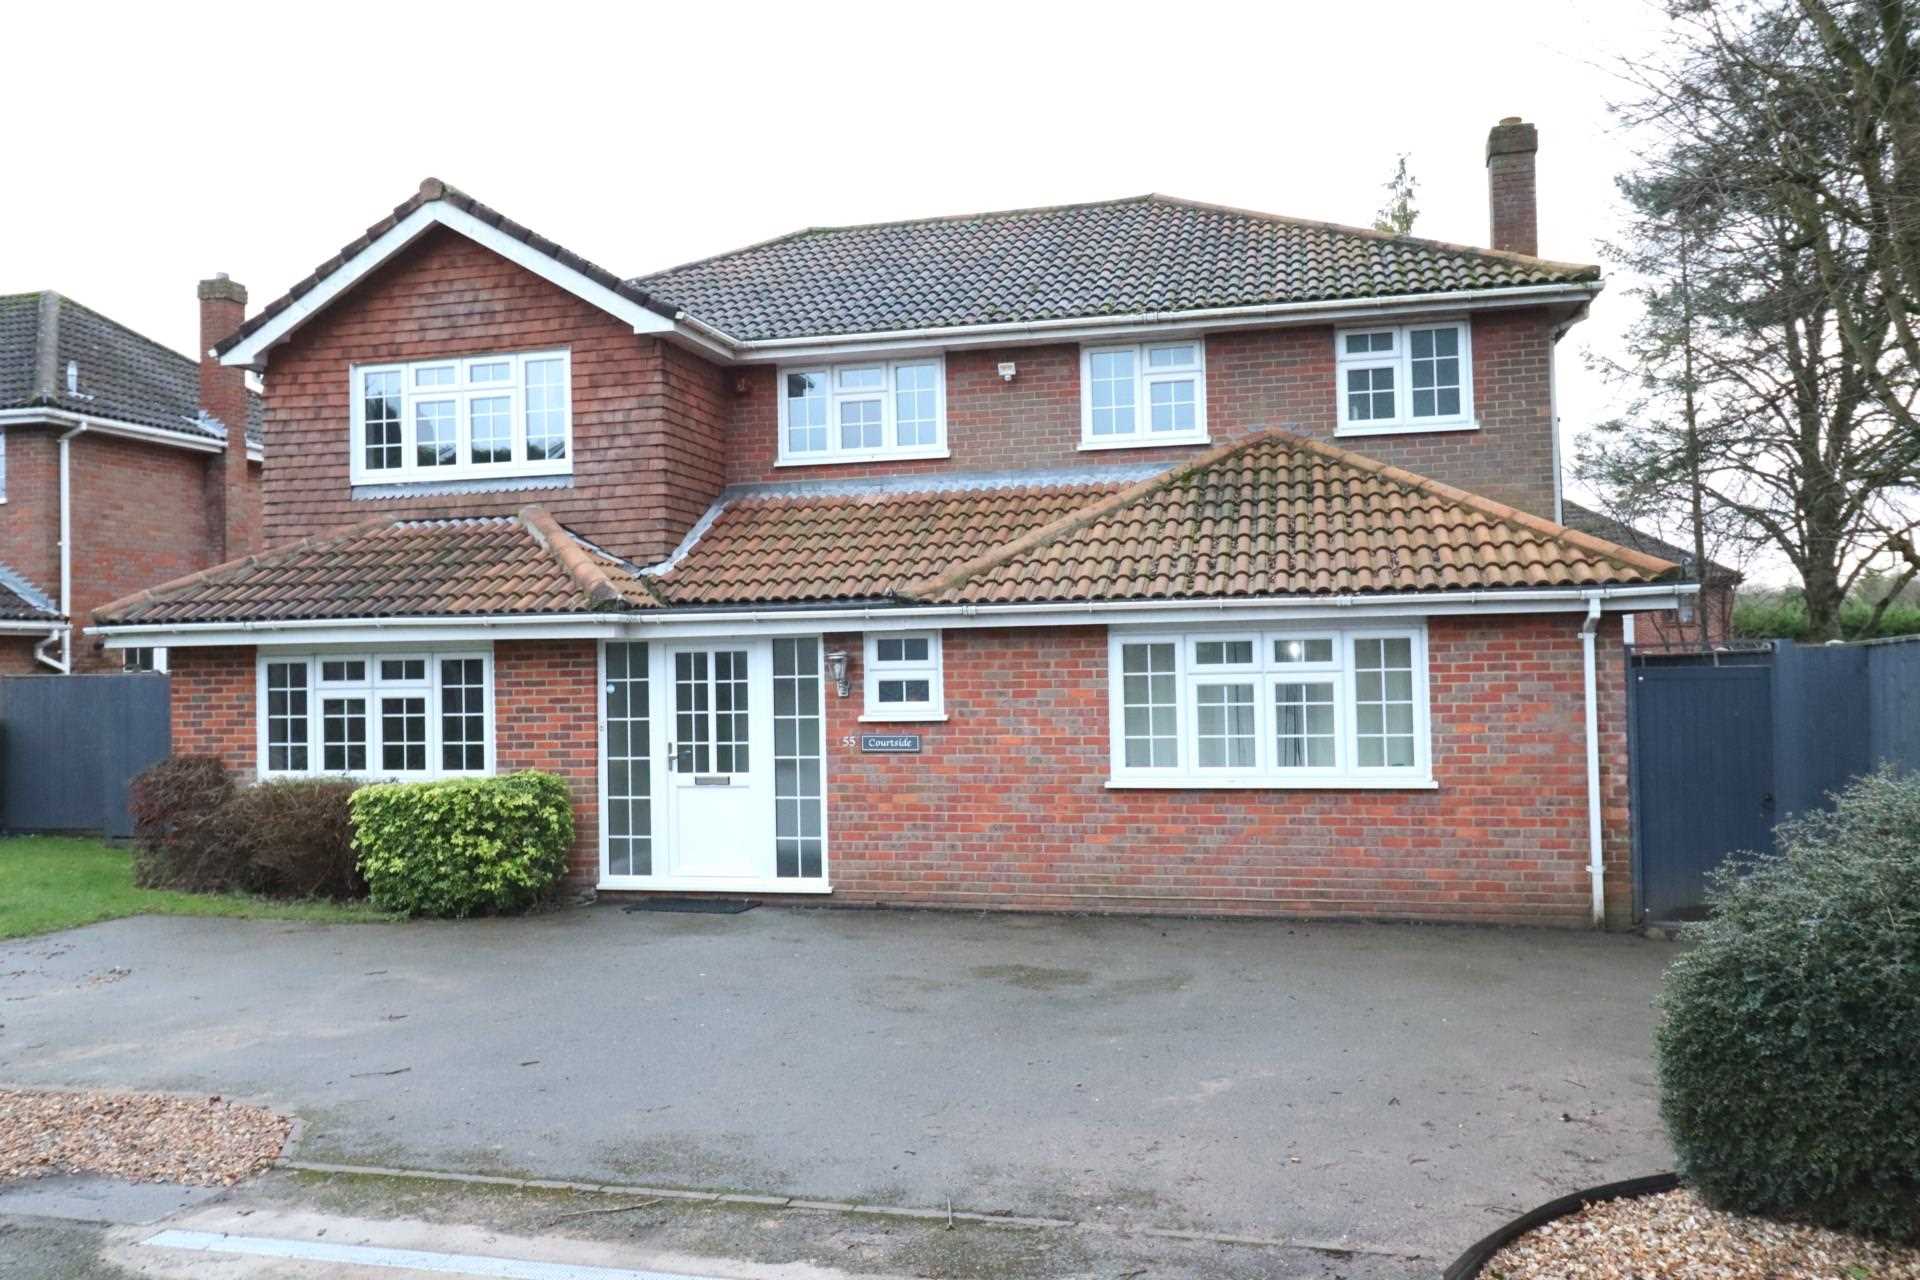 5 bed Detached House for rent in High Wycombe. From Eden Sales & Lettings - High Wycombe